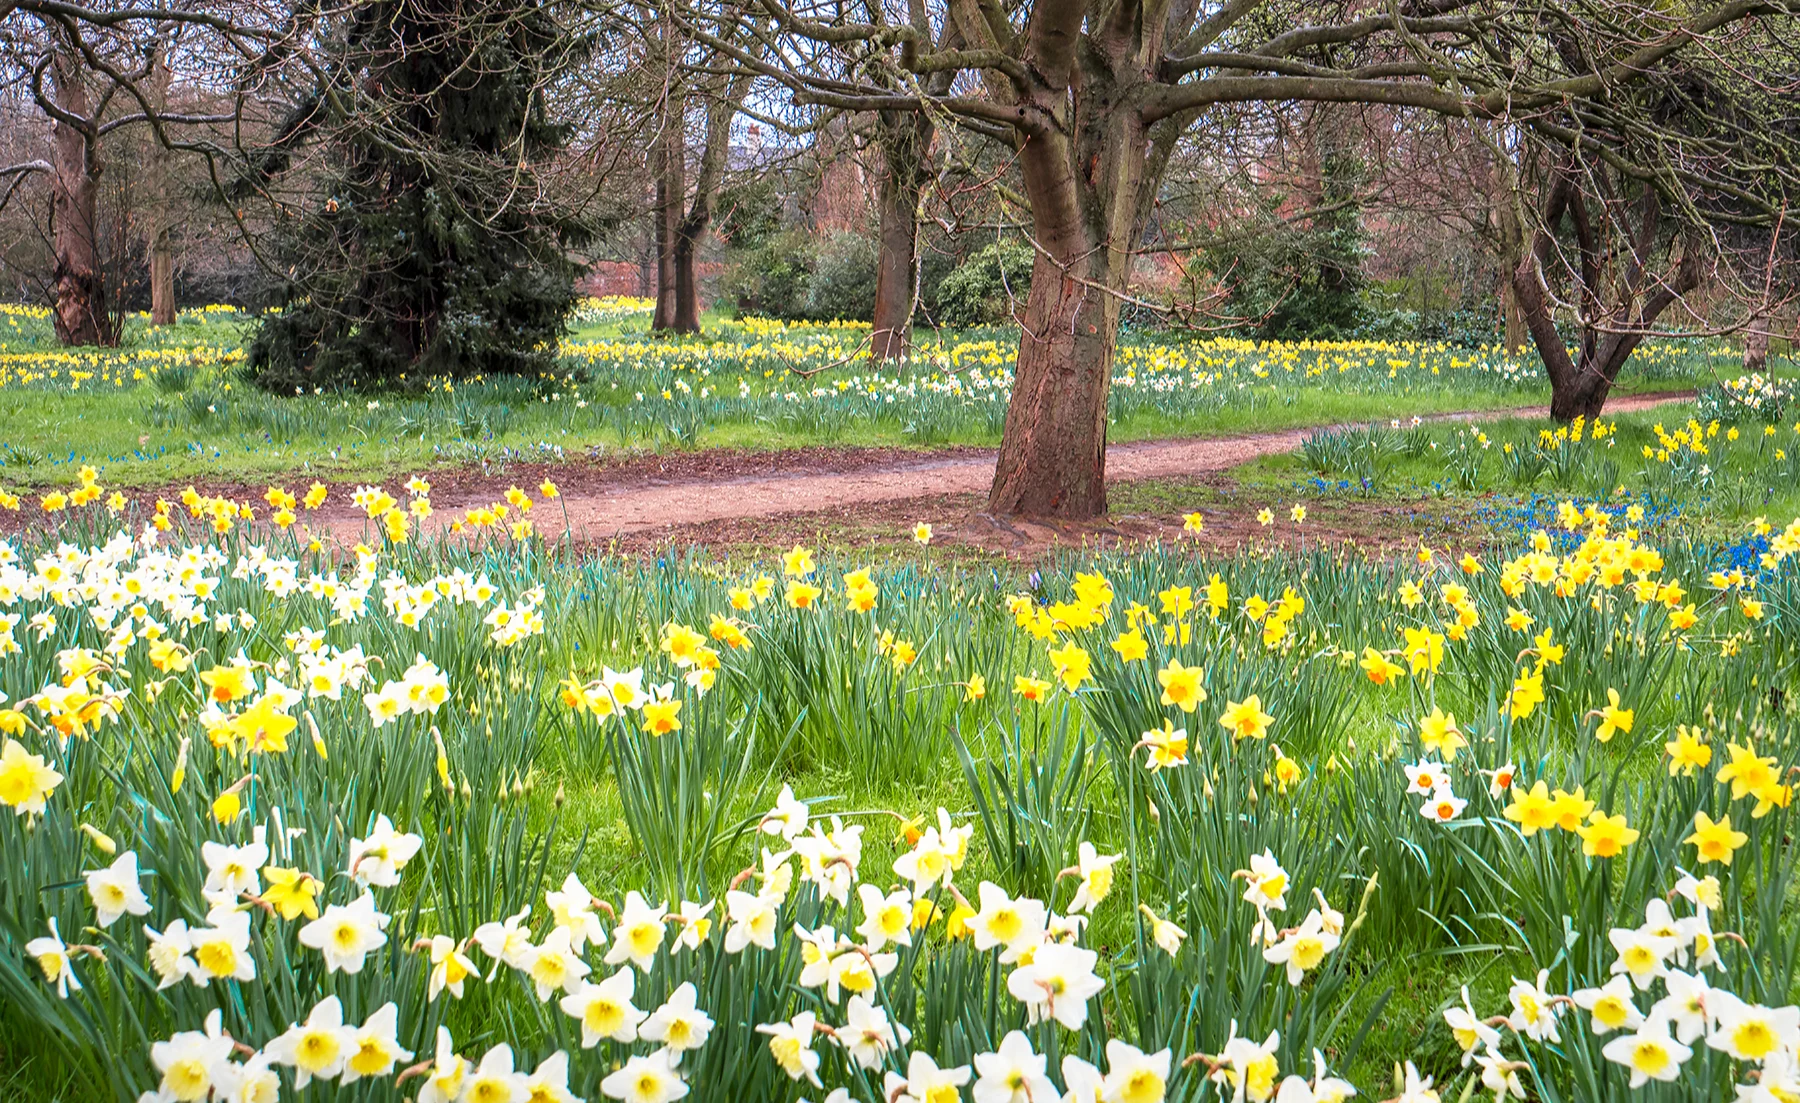 Hundreds of yellow and white daffodils surrounding trees and a dirt path.